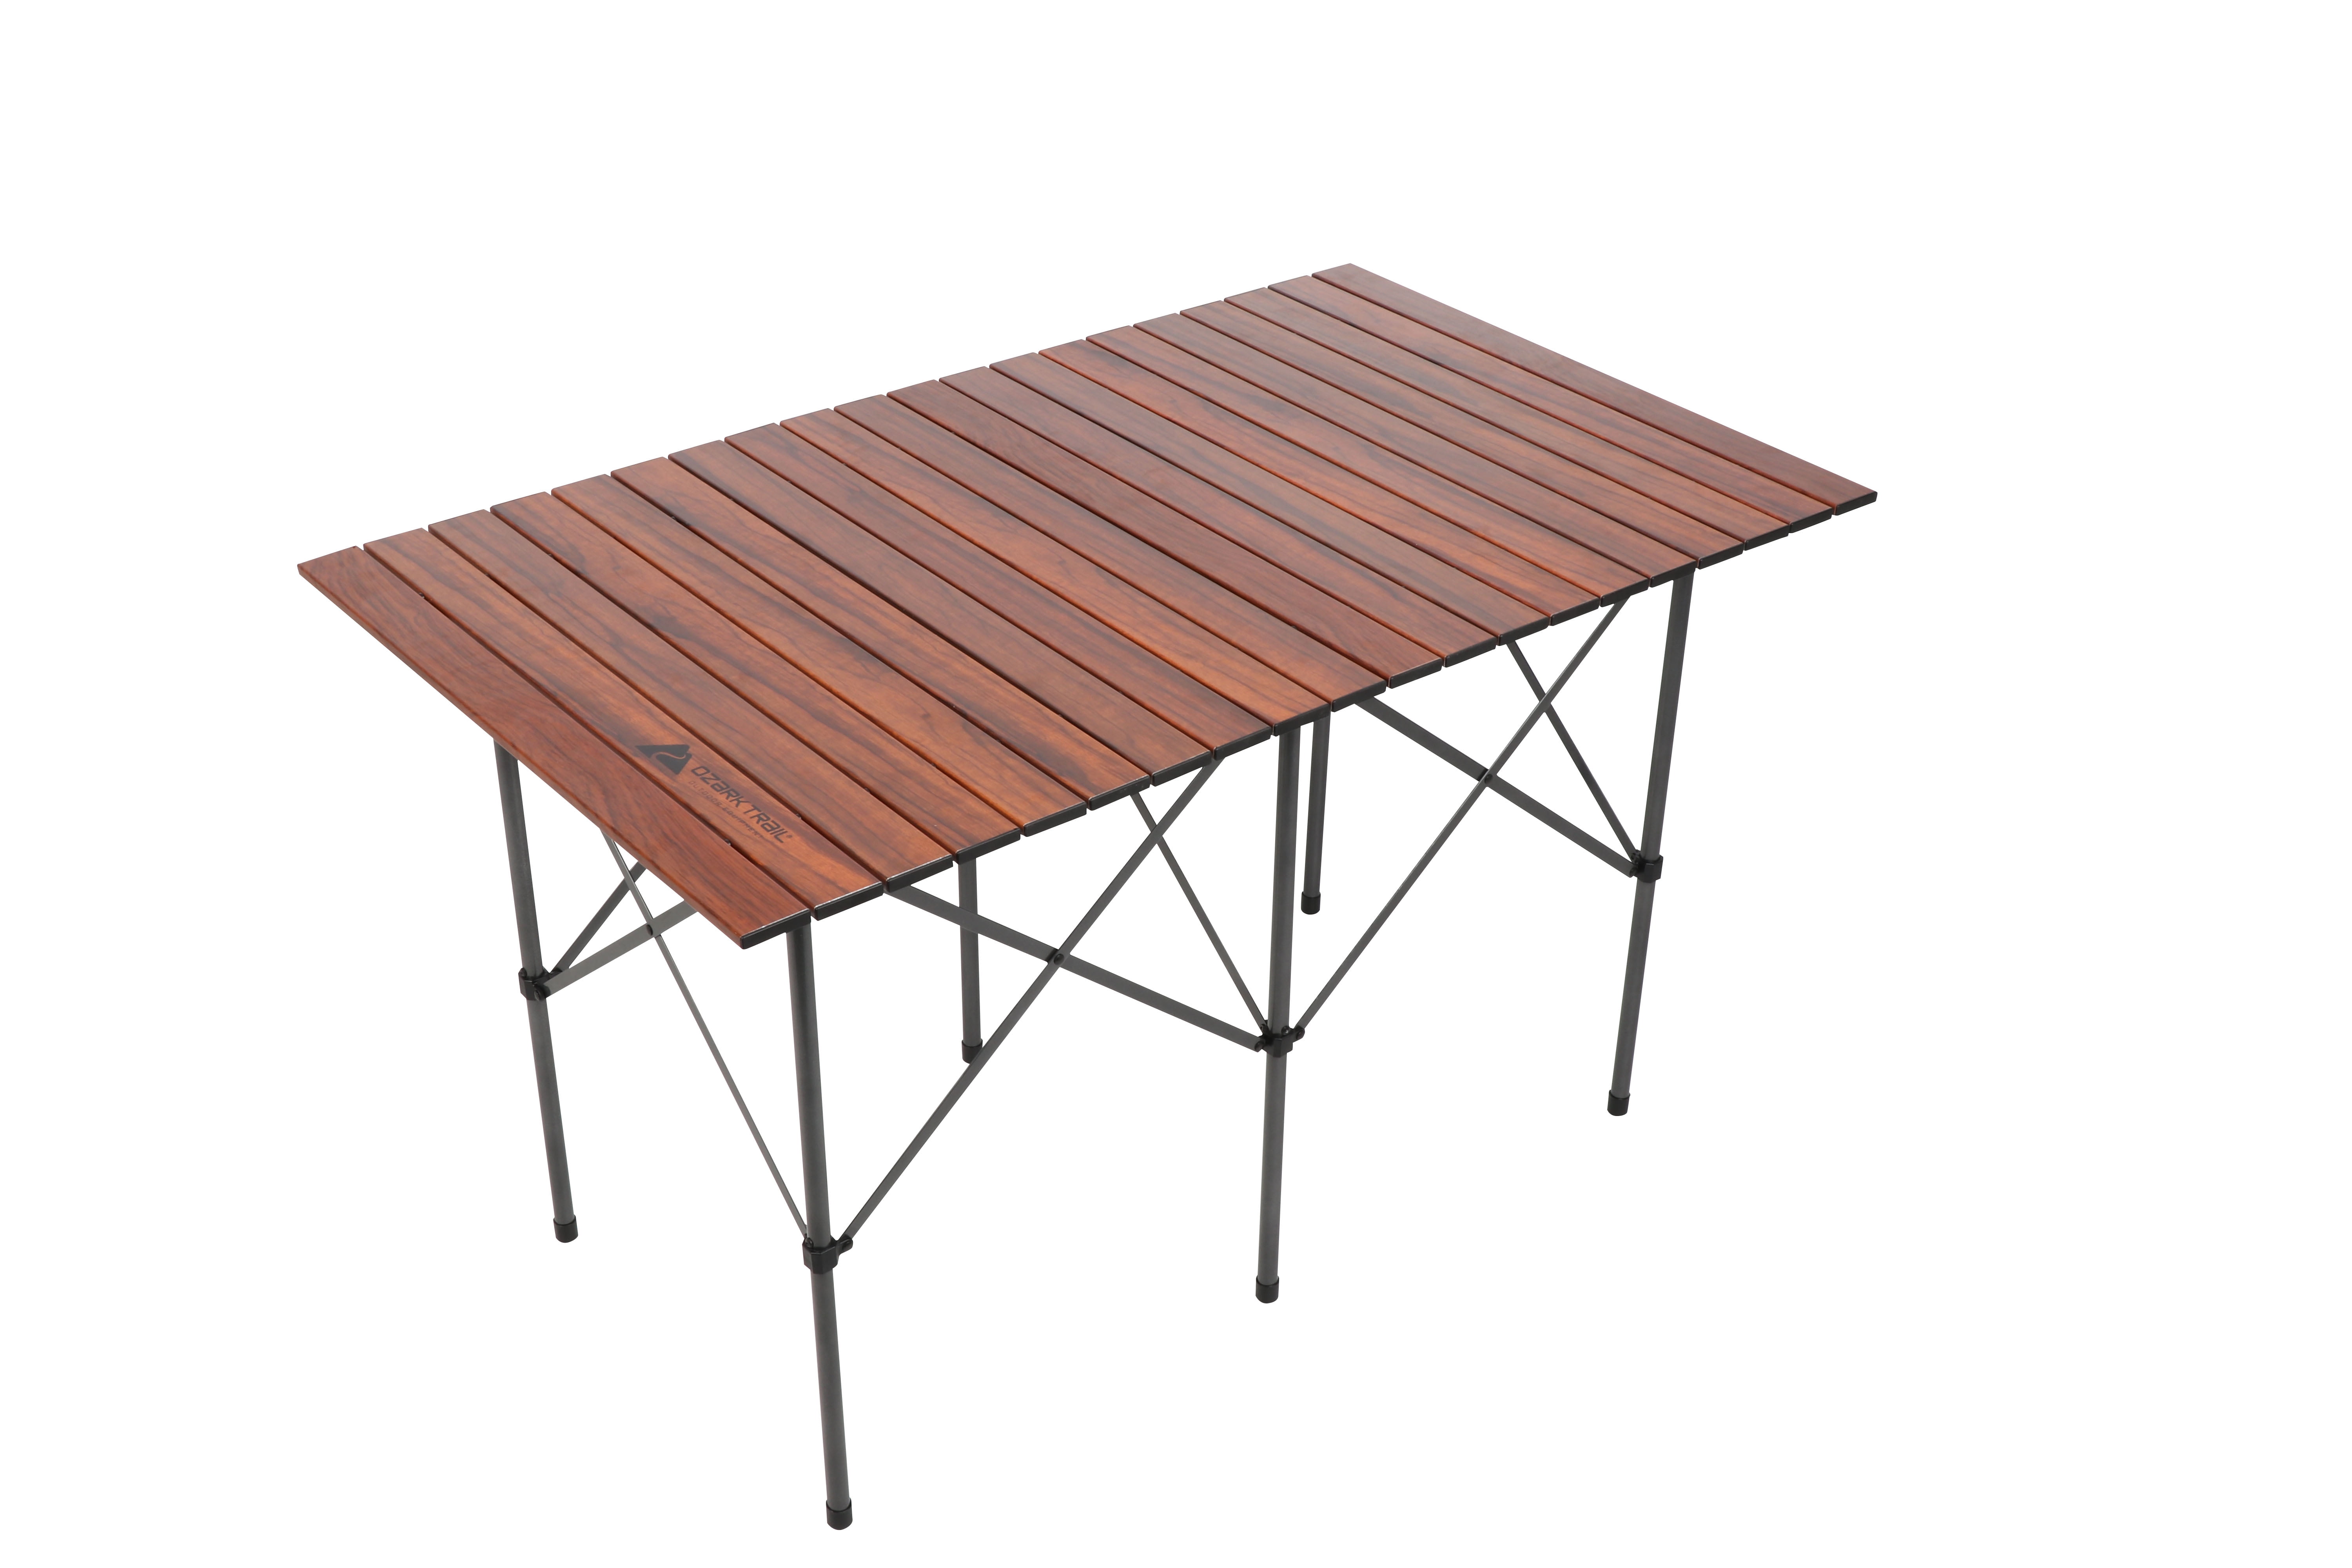 Ozark Trail Roll-Top Rectangular Aluminum Camping Table (Brown or Gray) $30 + Free Shipping w/ Walmart+ or on $35+